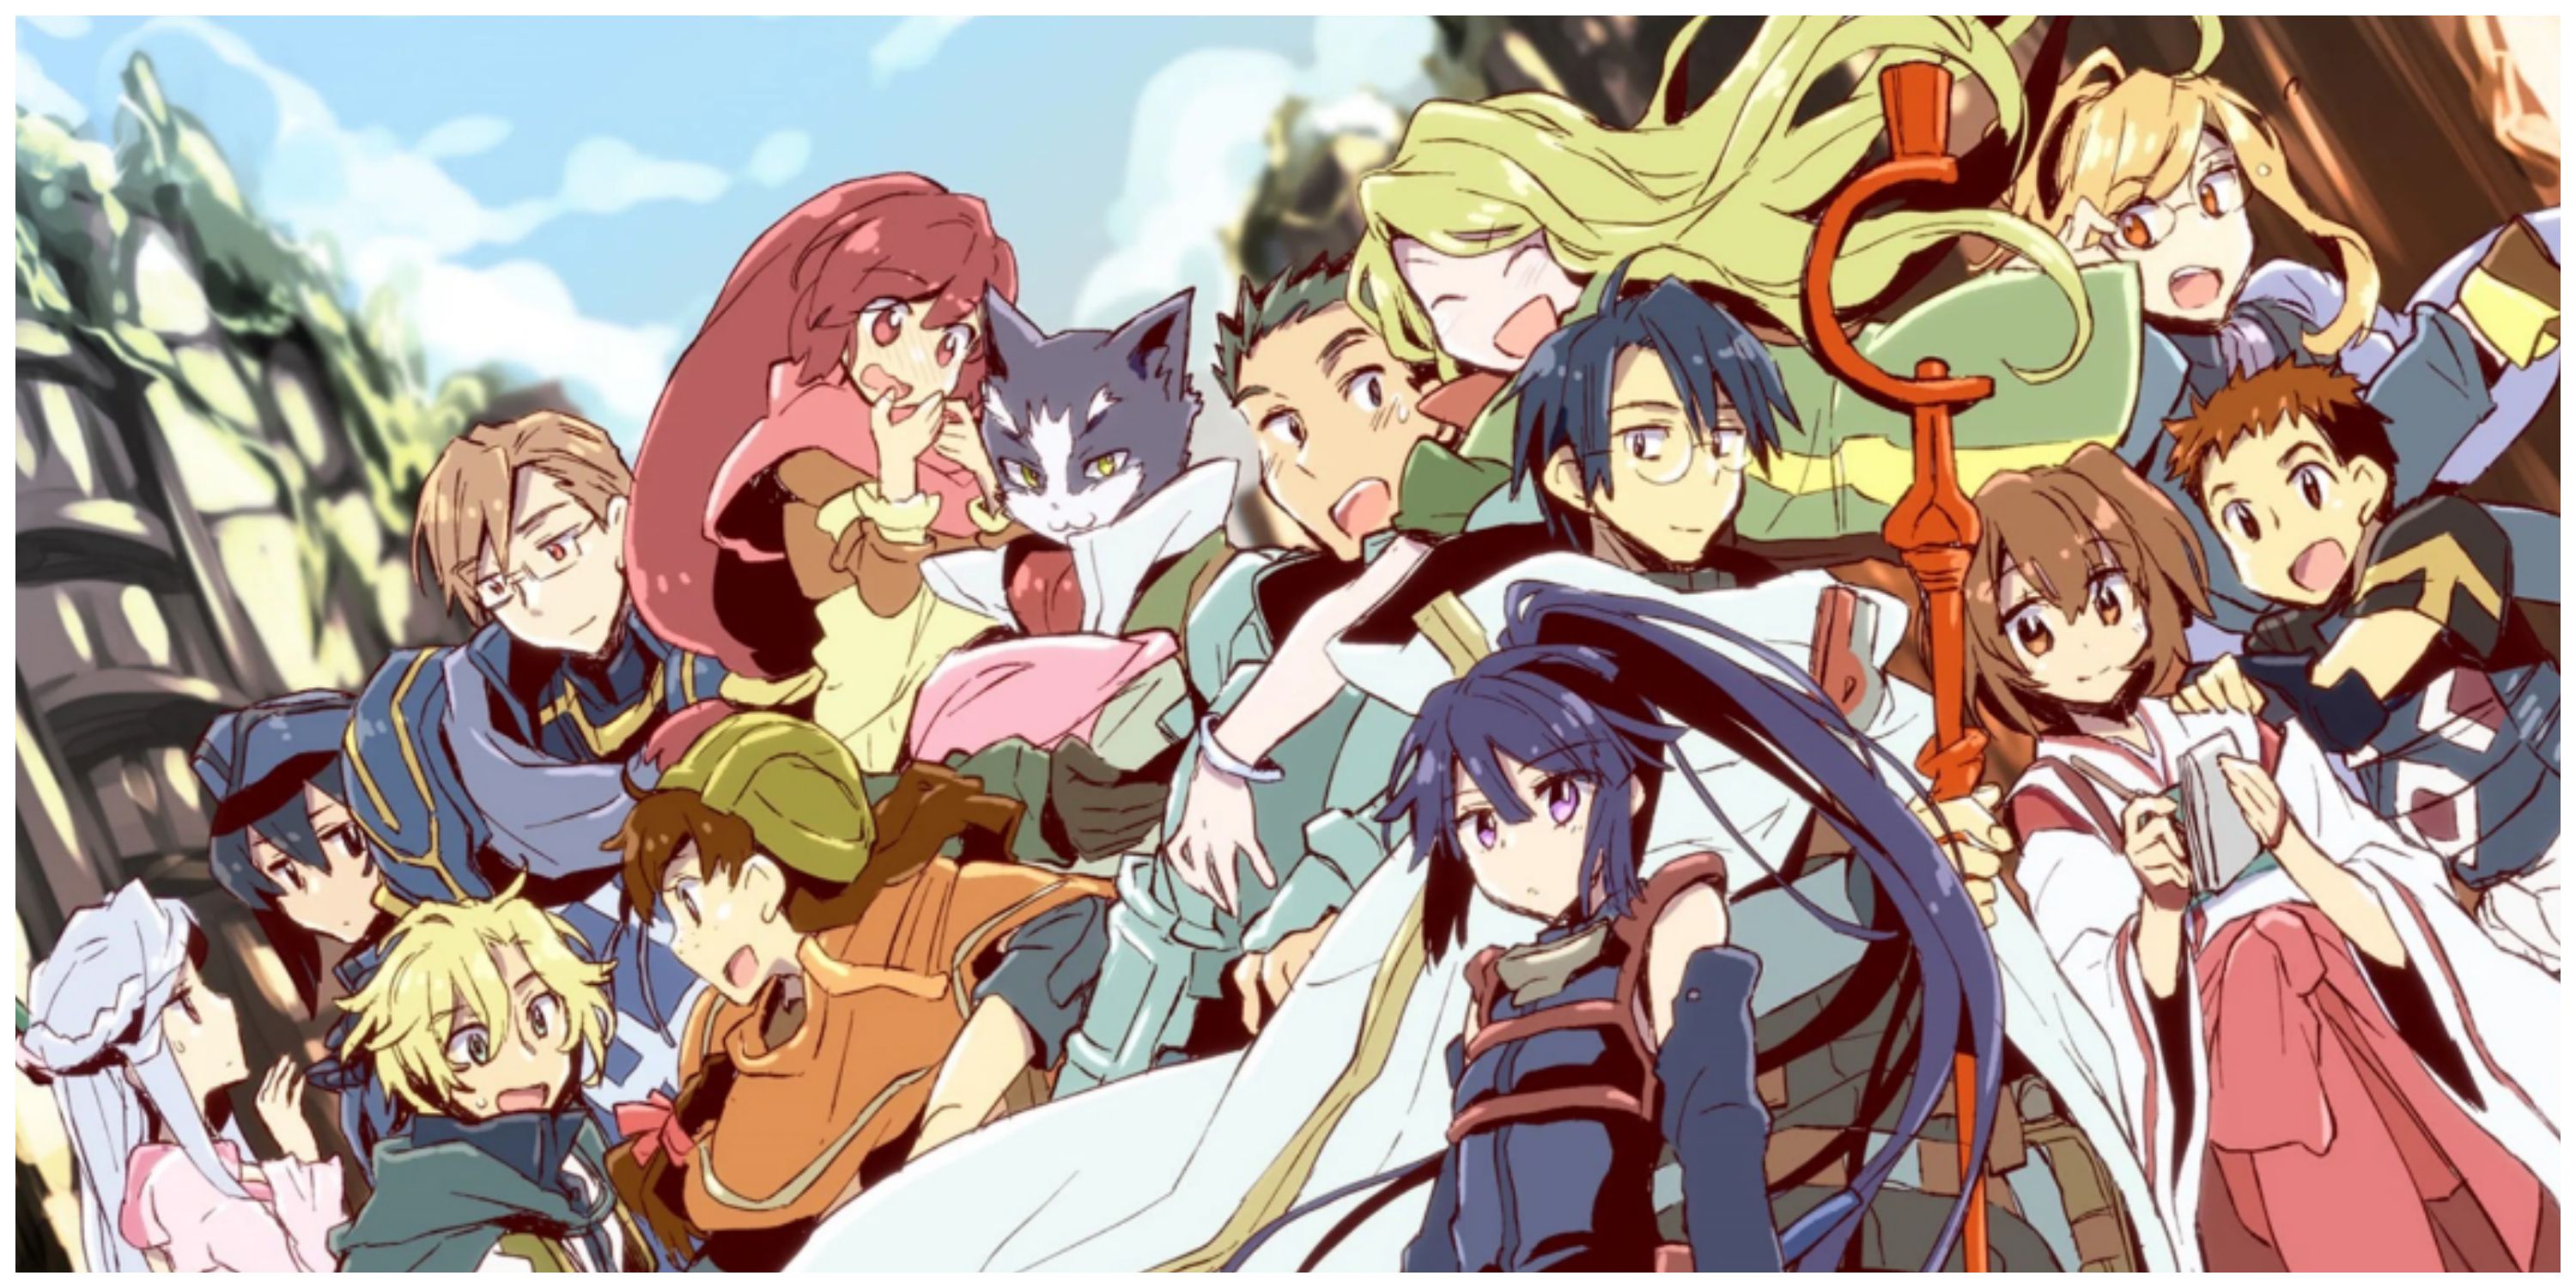 Log Horizon players trapped in monster filled world